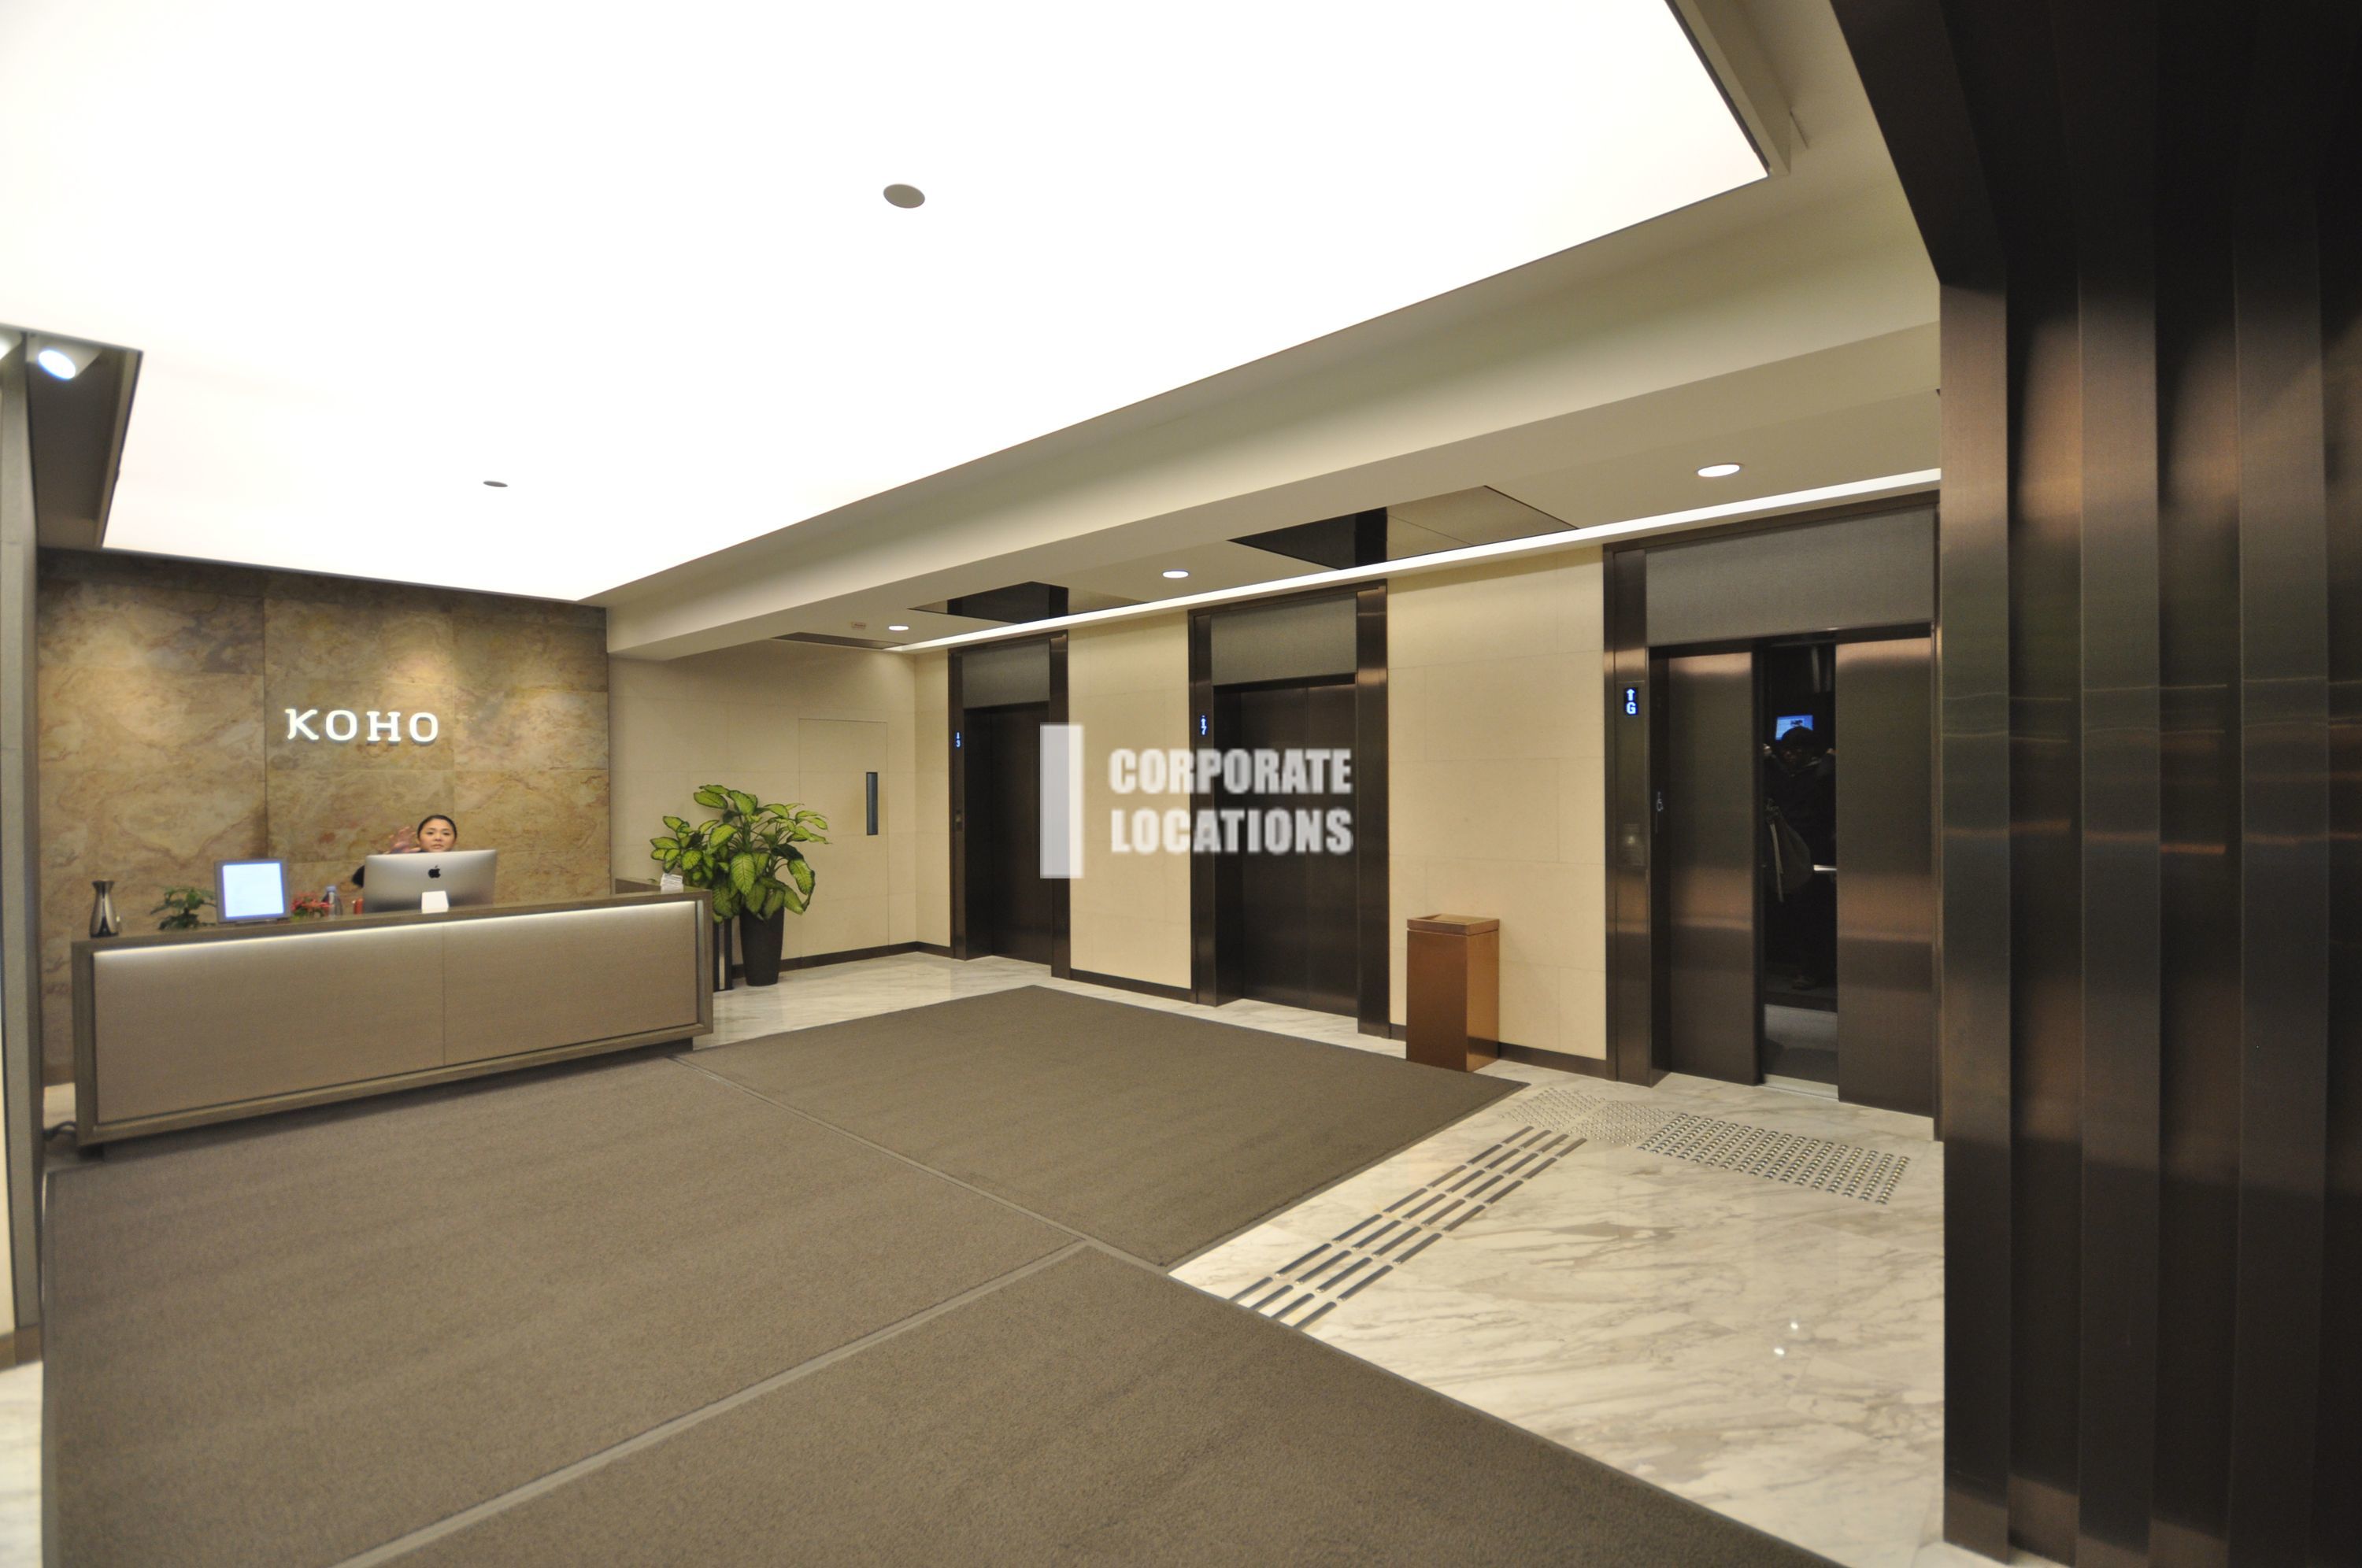 Lease offices in KOHO - Kowloon Bay / Kwun Tong